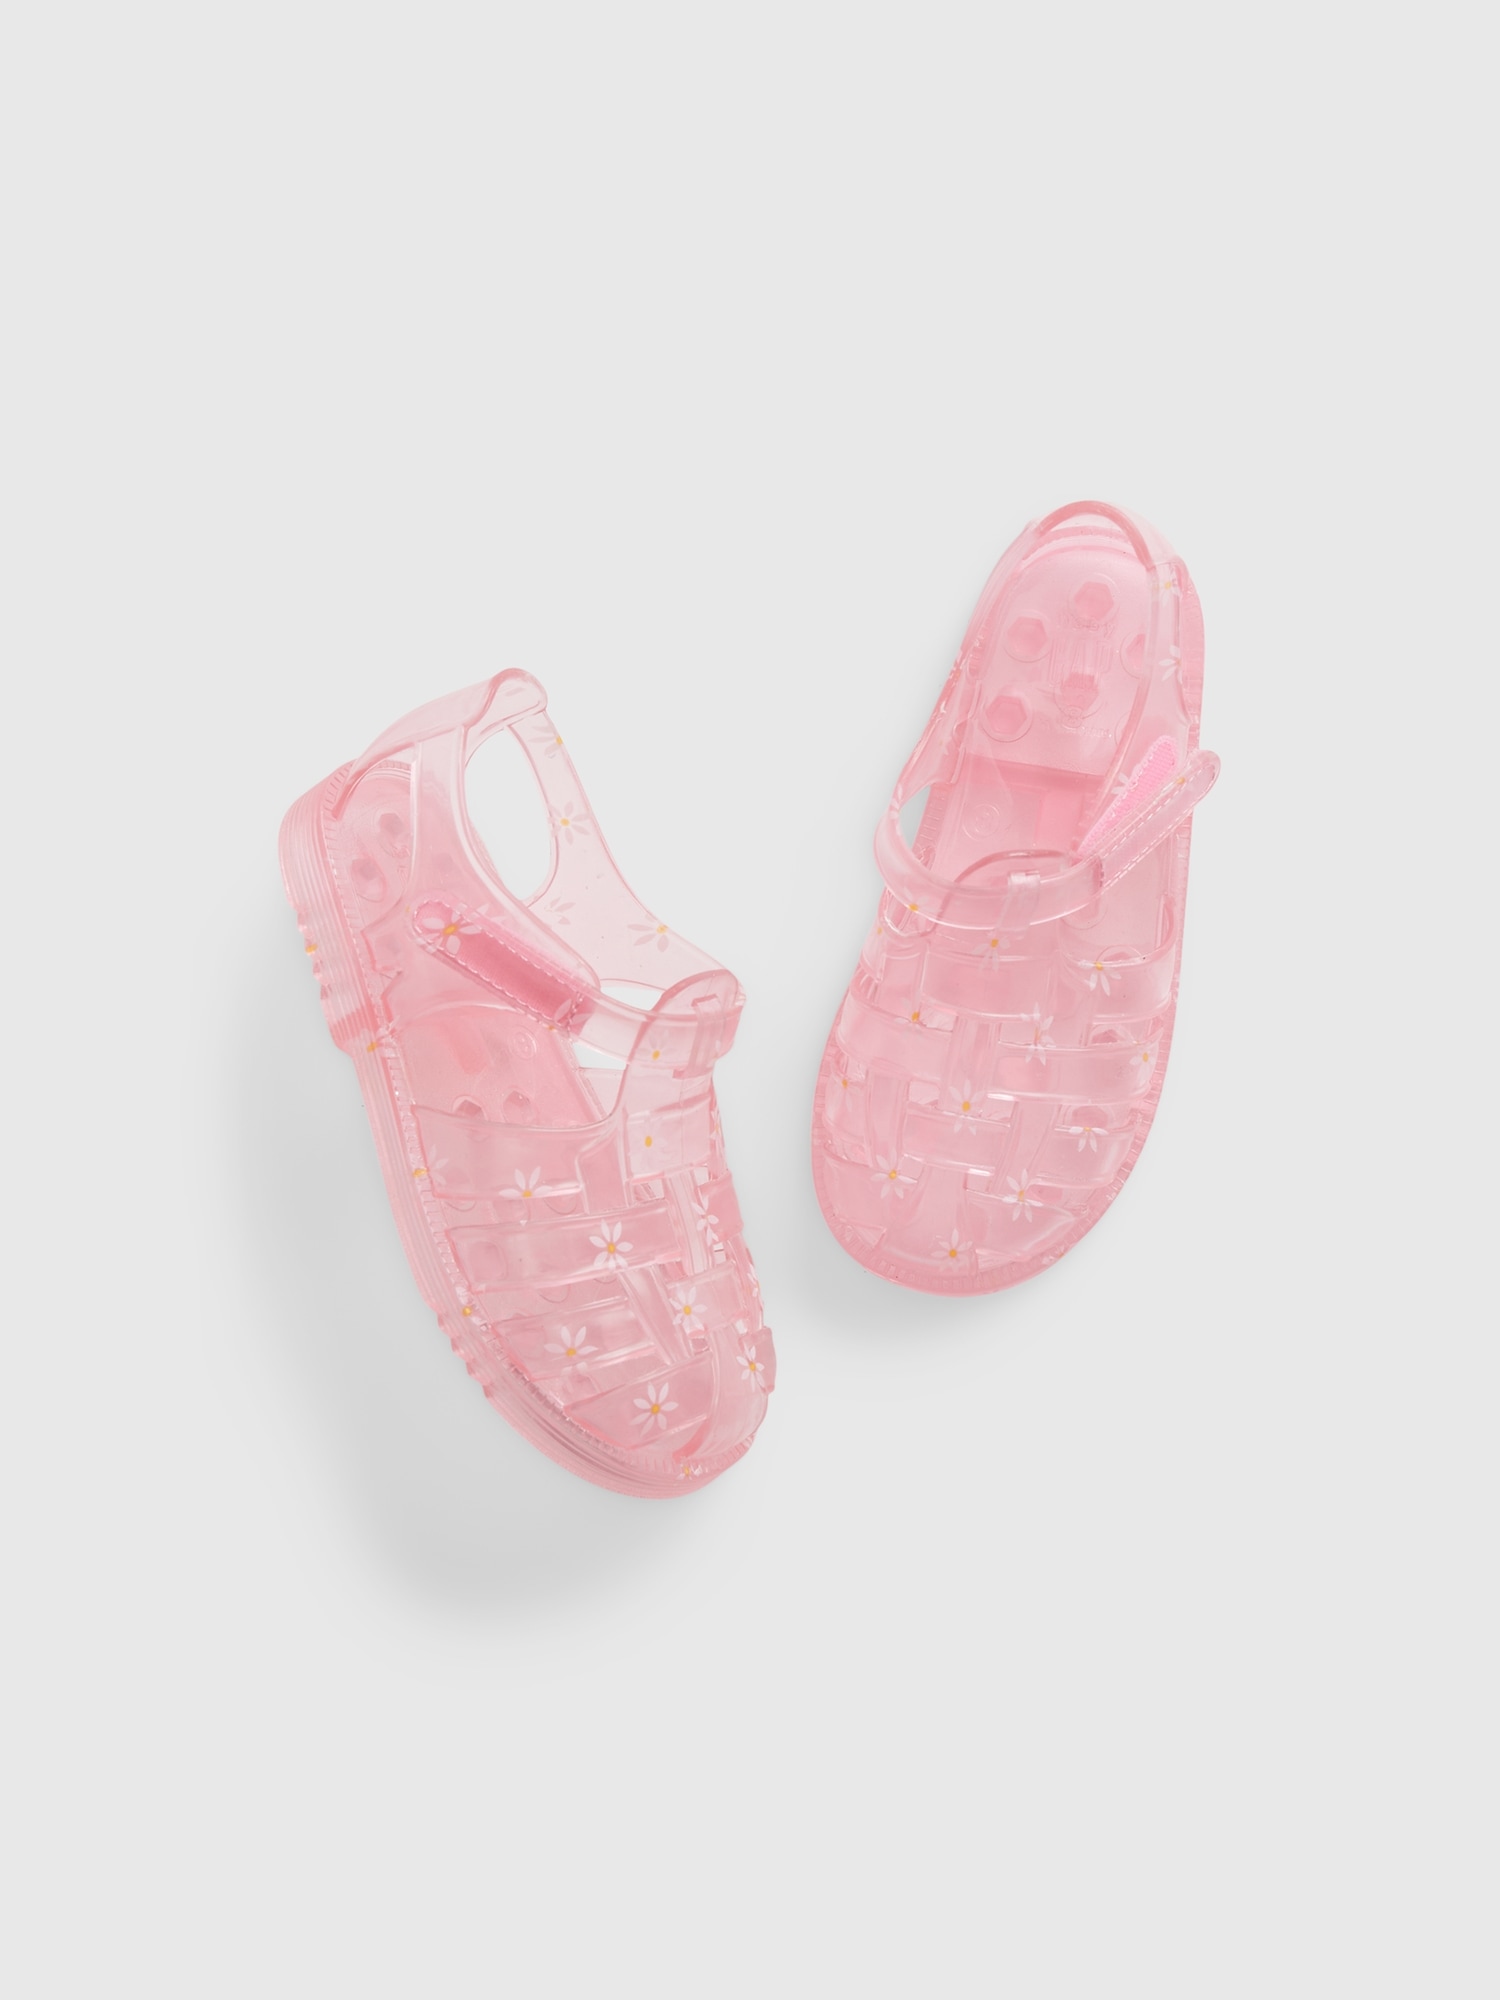 Gap Babies' Toddler Jelly Sandals In Pink